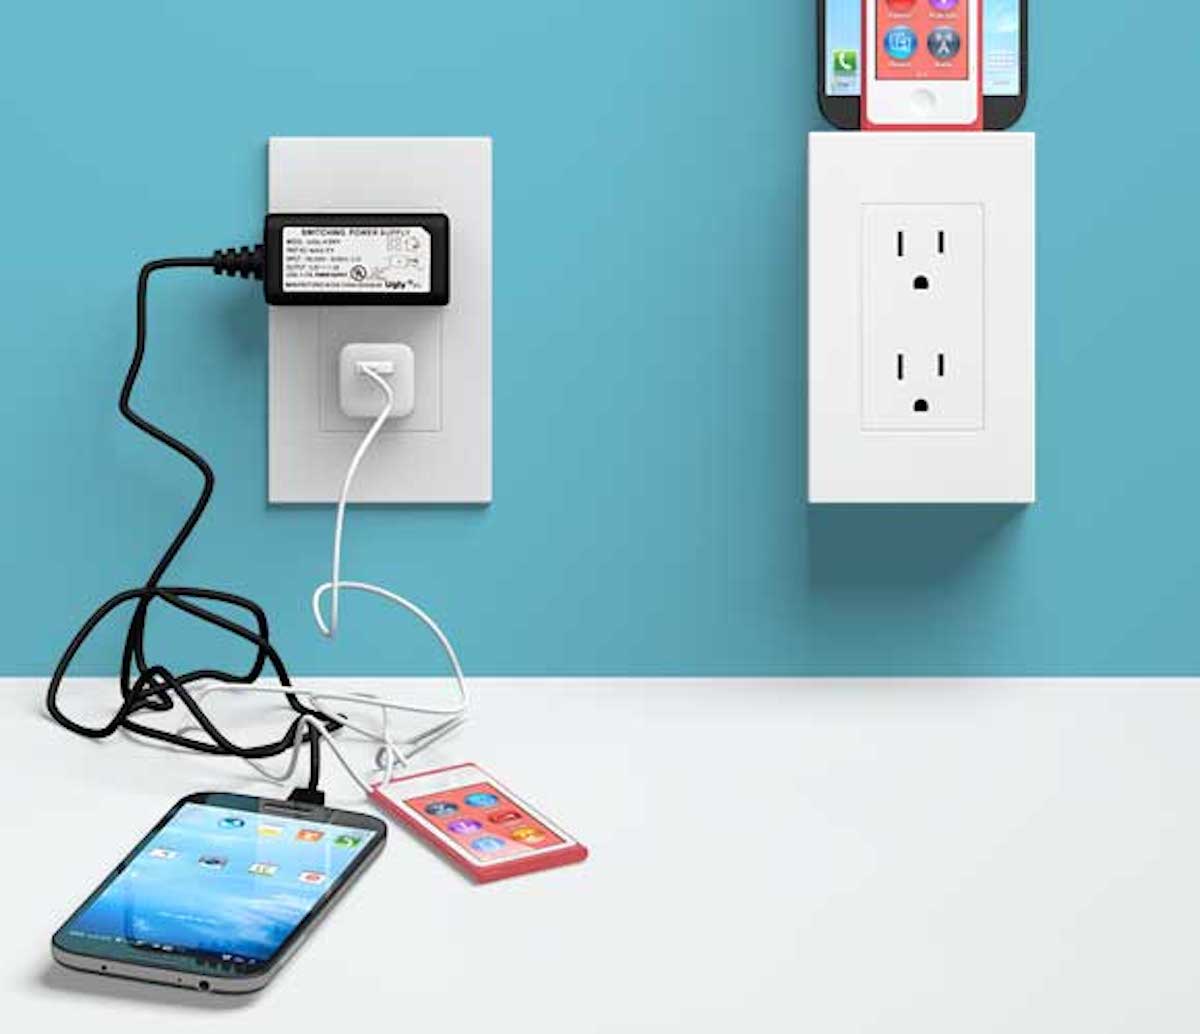 Turn Your Boring Wall Outlet Into A Powerful Charging Hub For All Your Devices